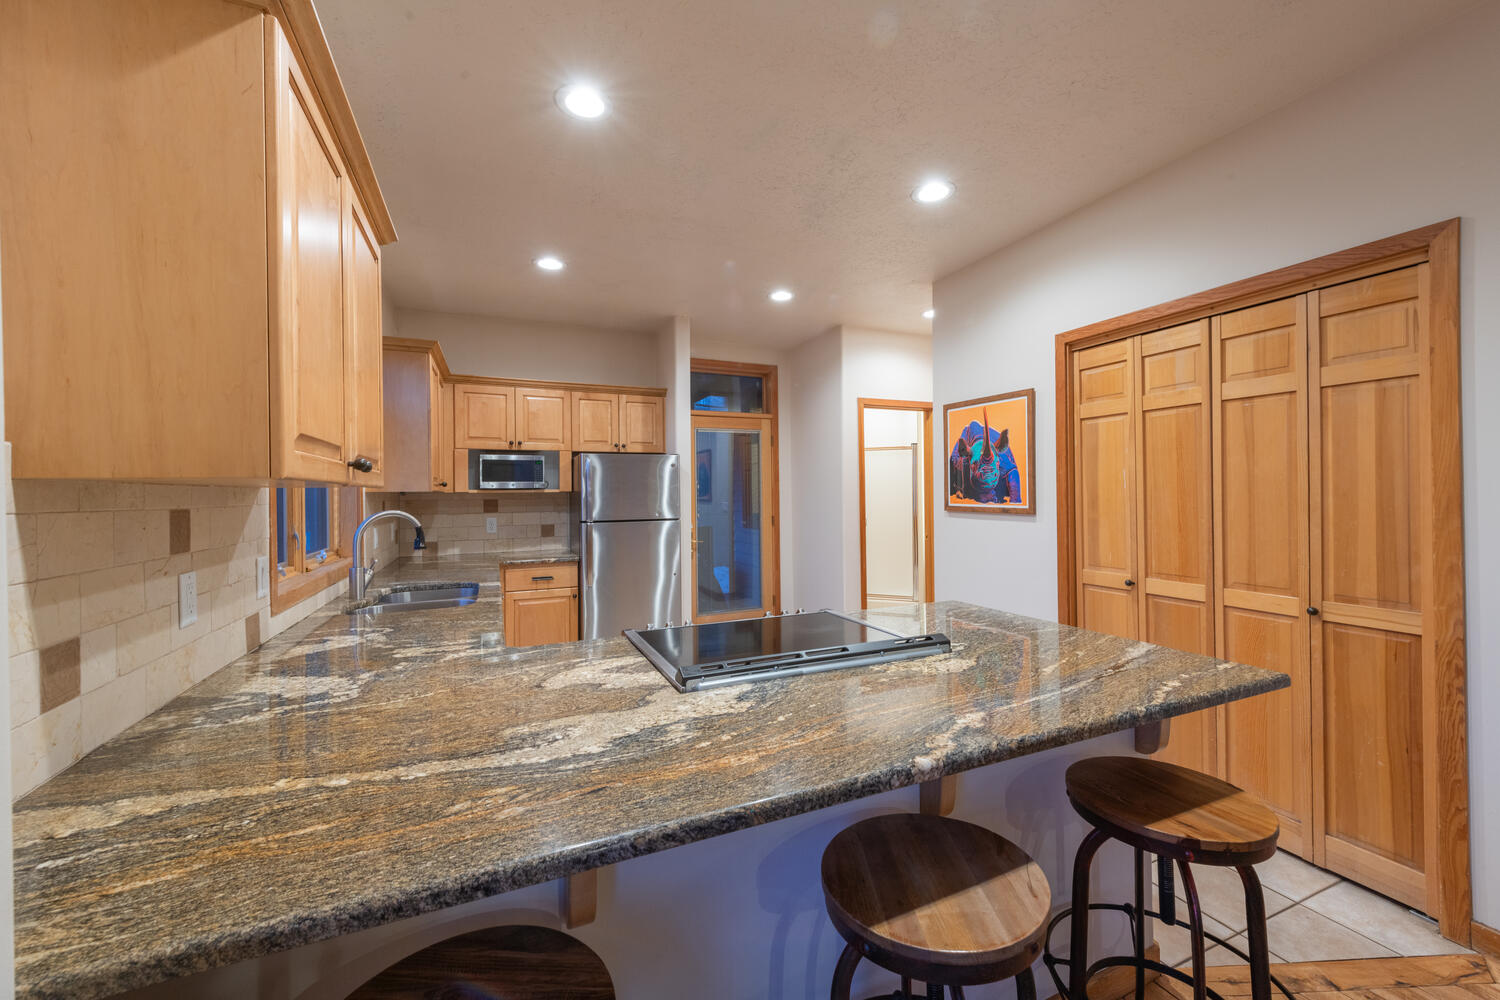 Fully Equipped Kitchen with Stone Counters and Bar Seating